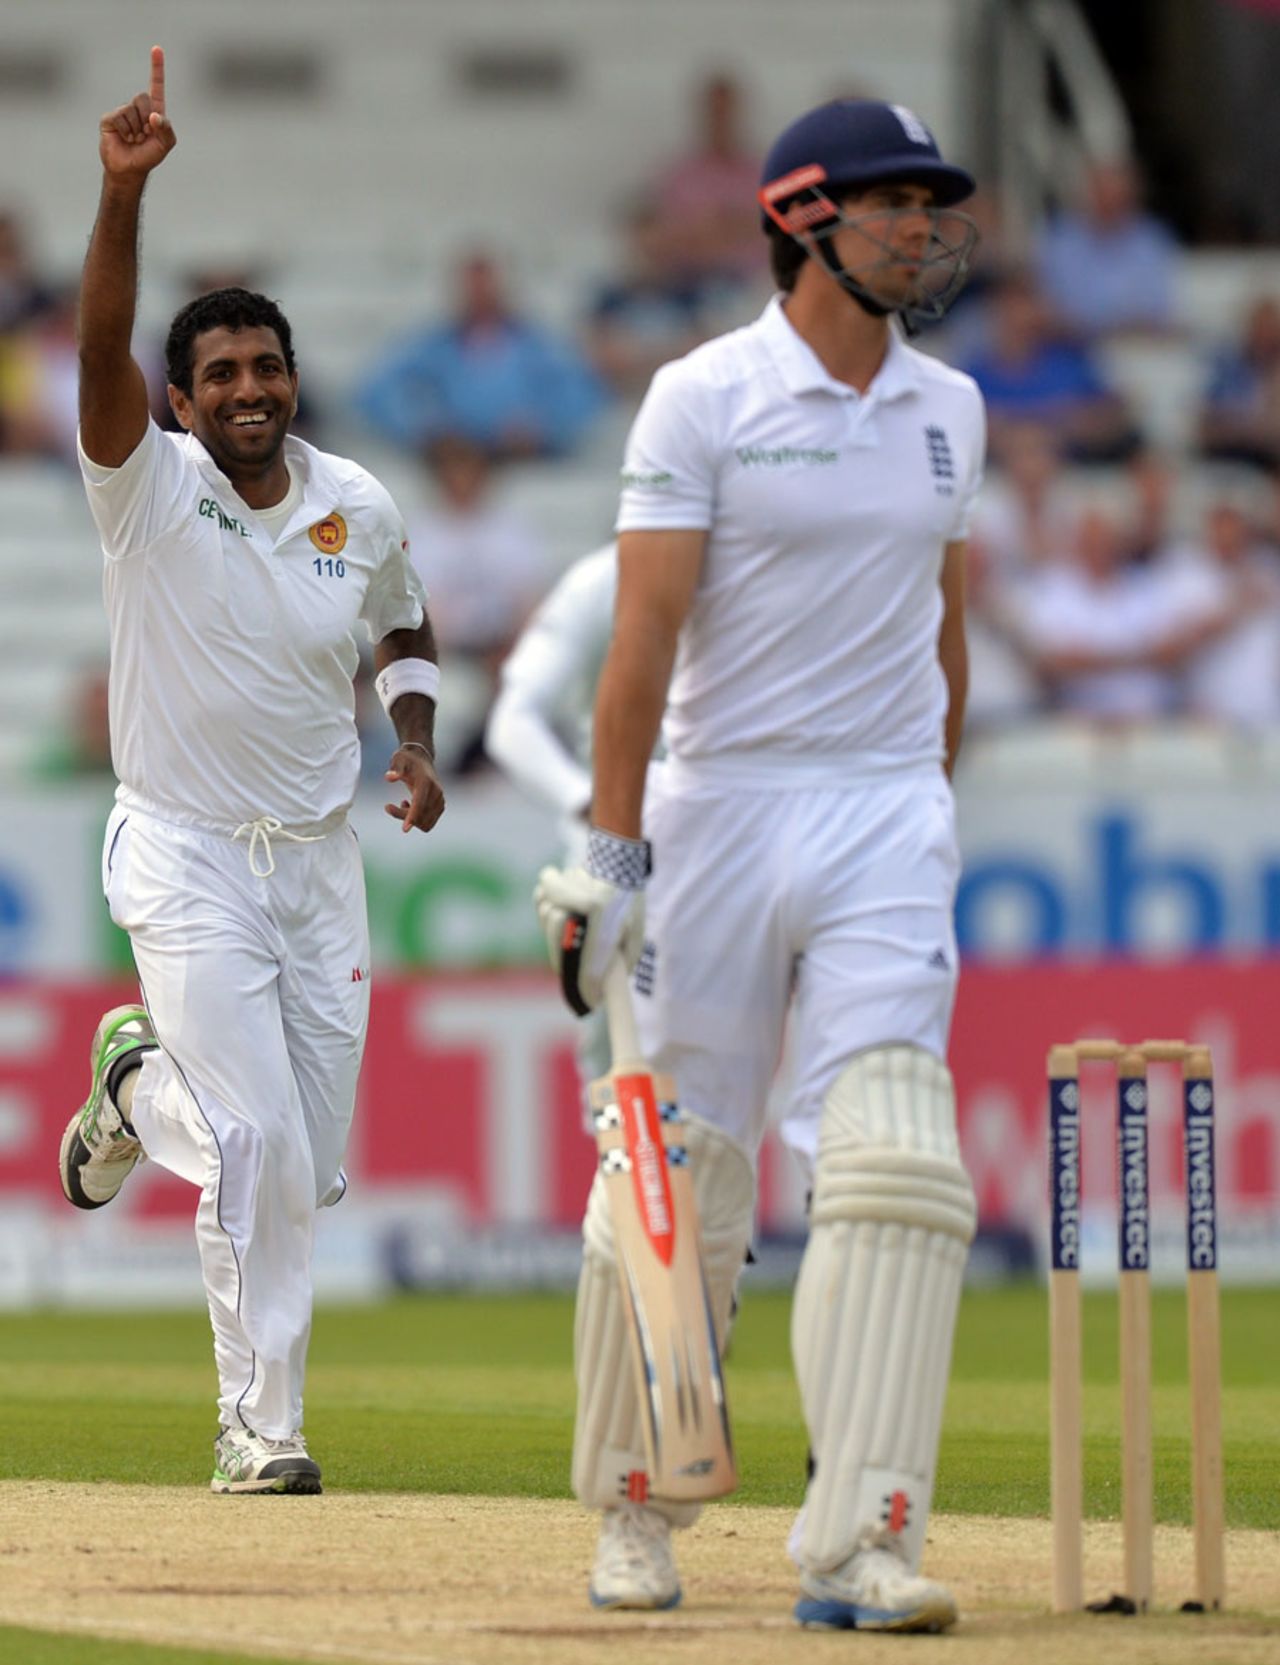 Dhammika Prasad removed Alastair Cook in the morning's fourth over, England v Sri Lanka, 2nd Investec Test, Headingley, 2nd day, June 21, 2014